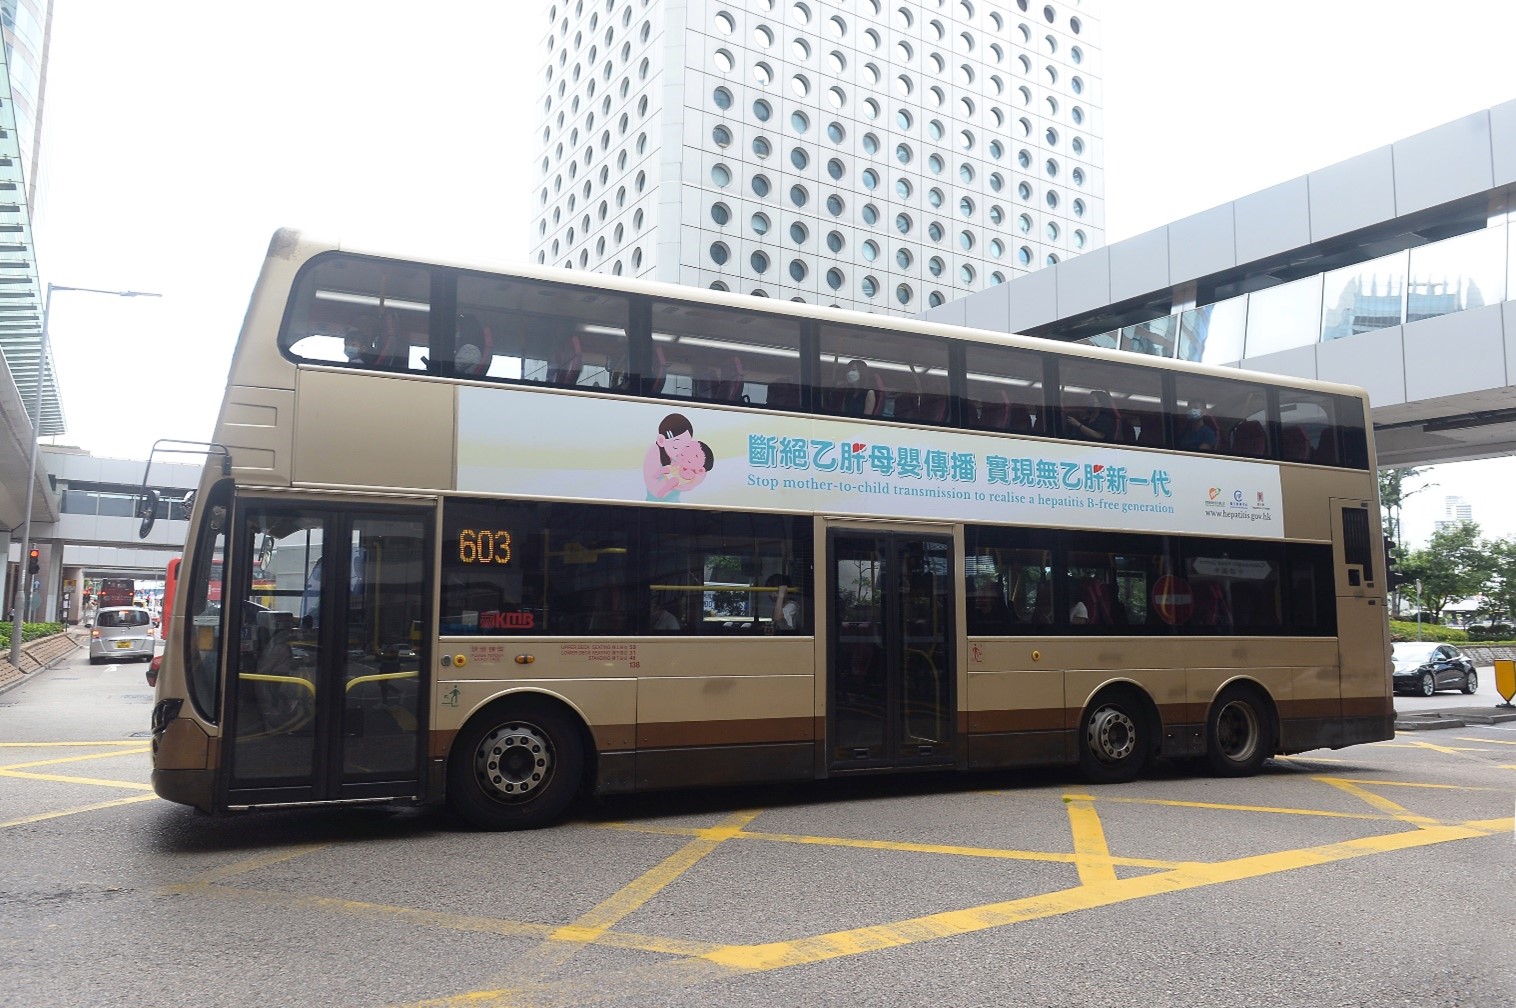 Bus body advertising with the theme “Stop mother-to-child transmission to realise a hepatitis B-free generation”